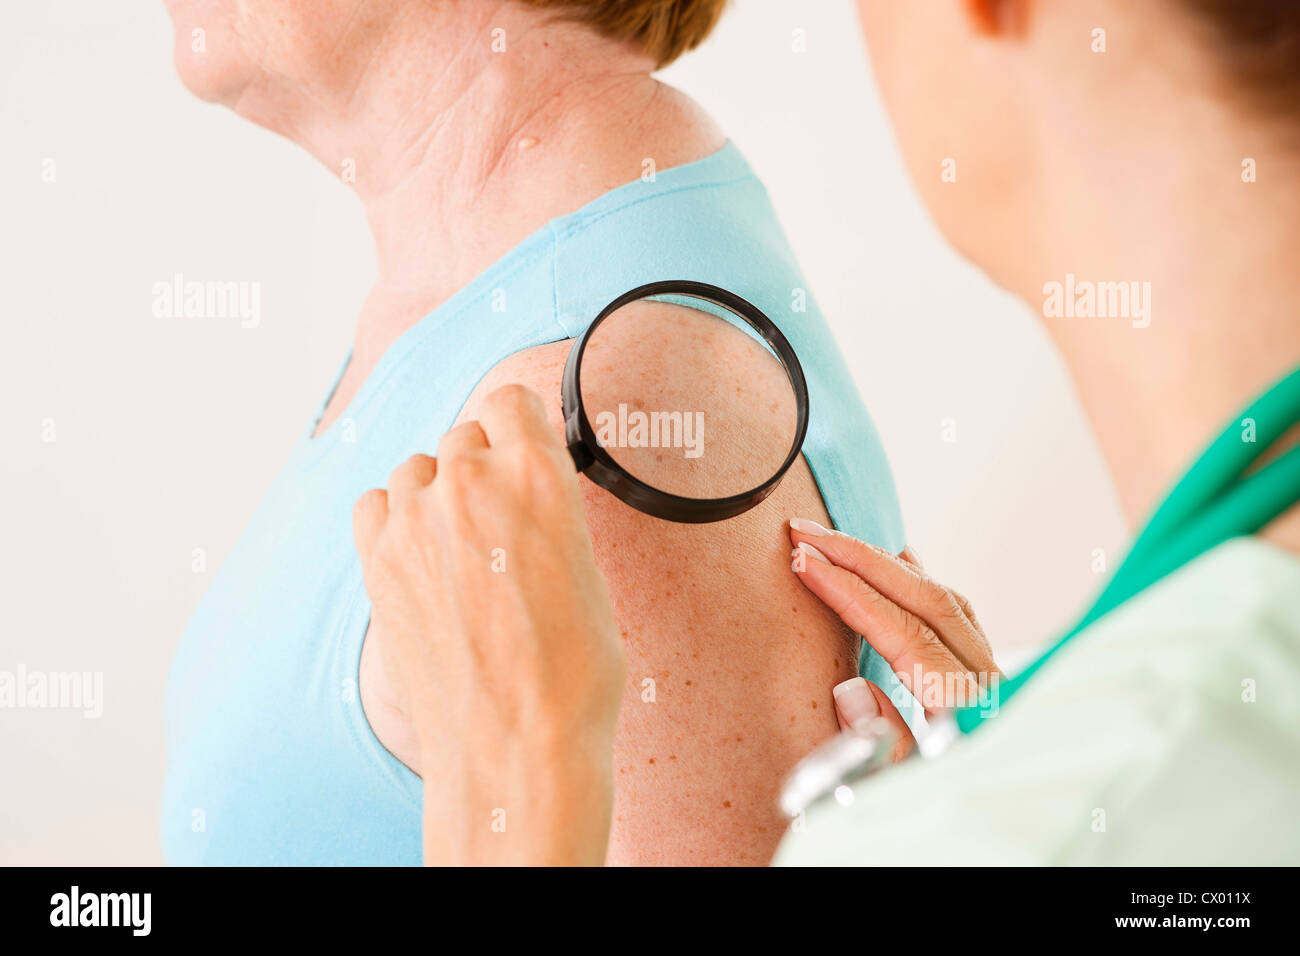 Female patient at female doctor Stock Photo